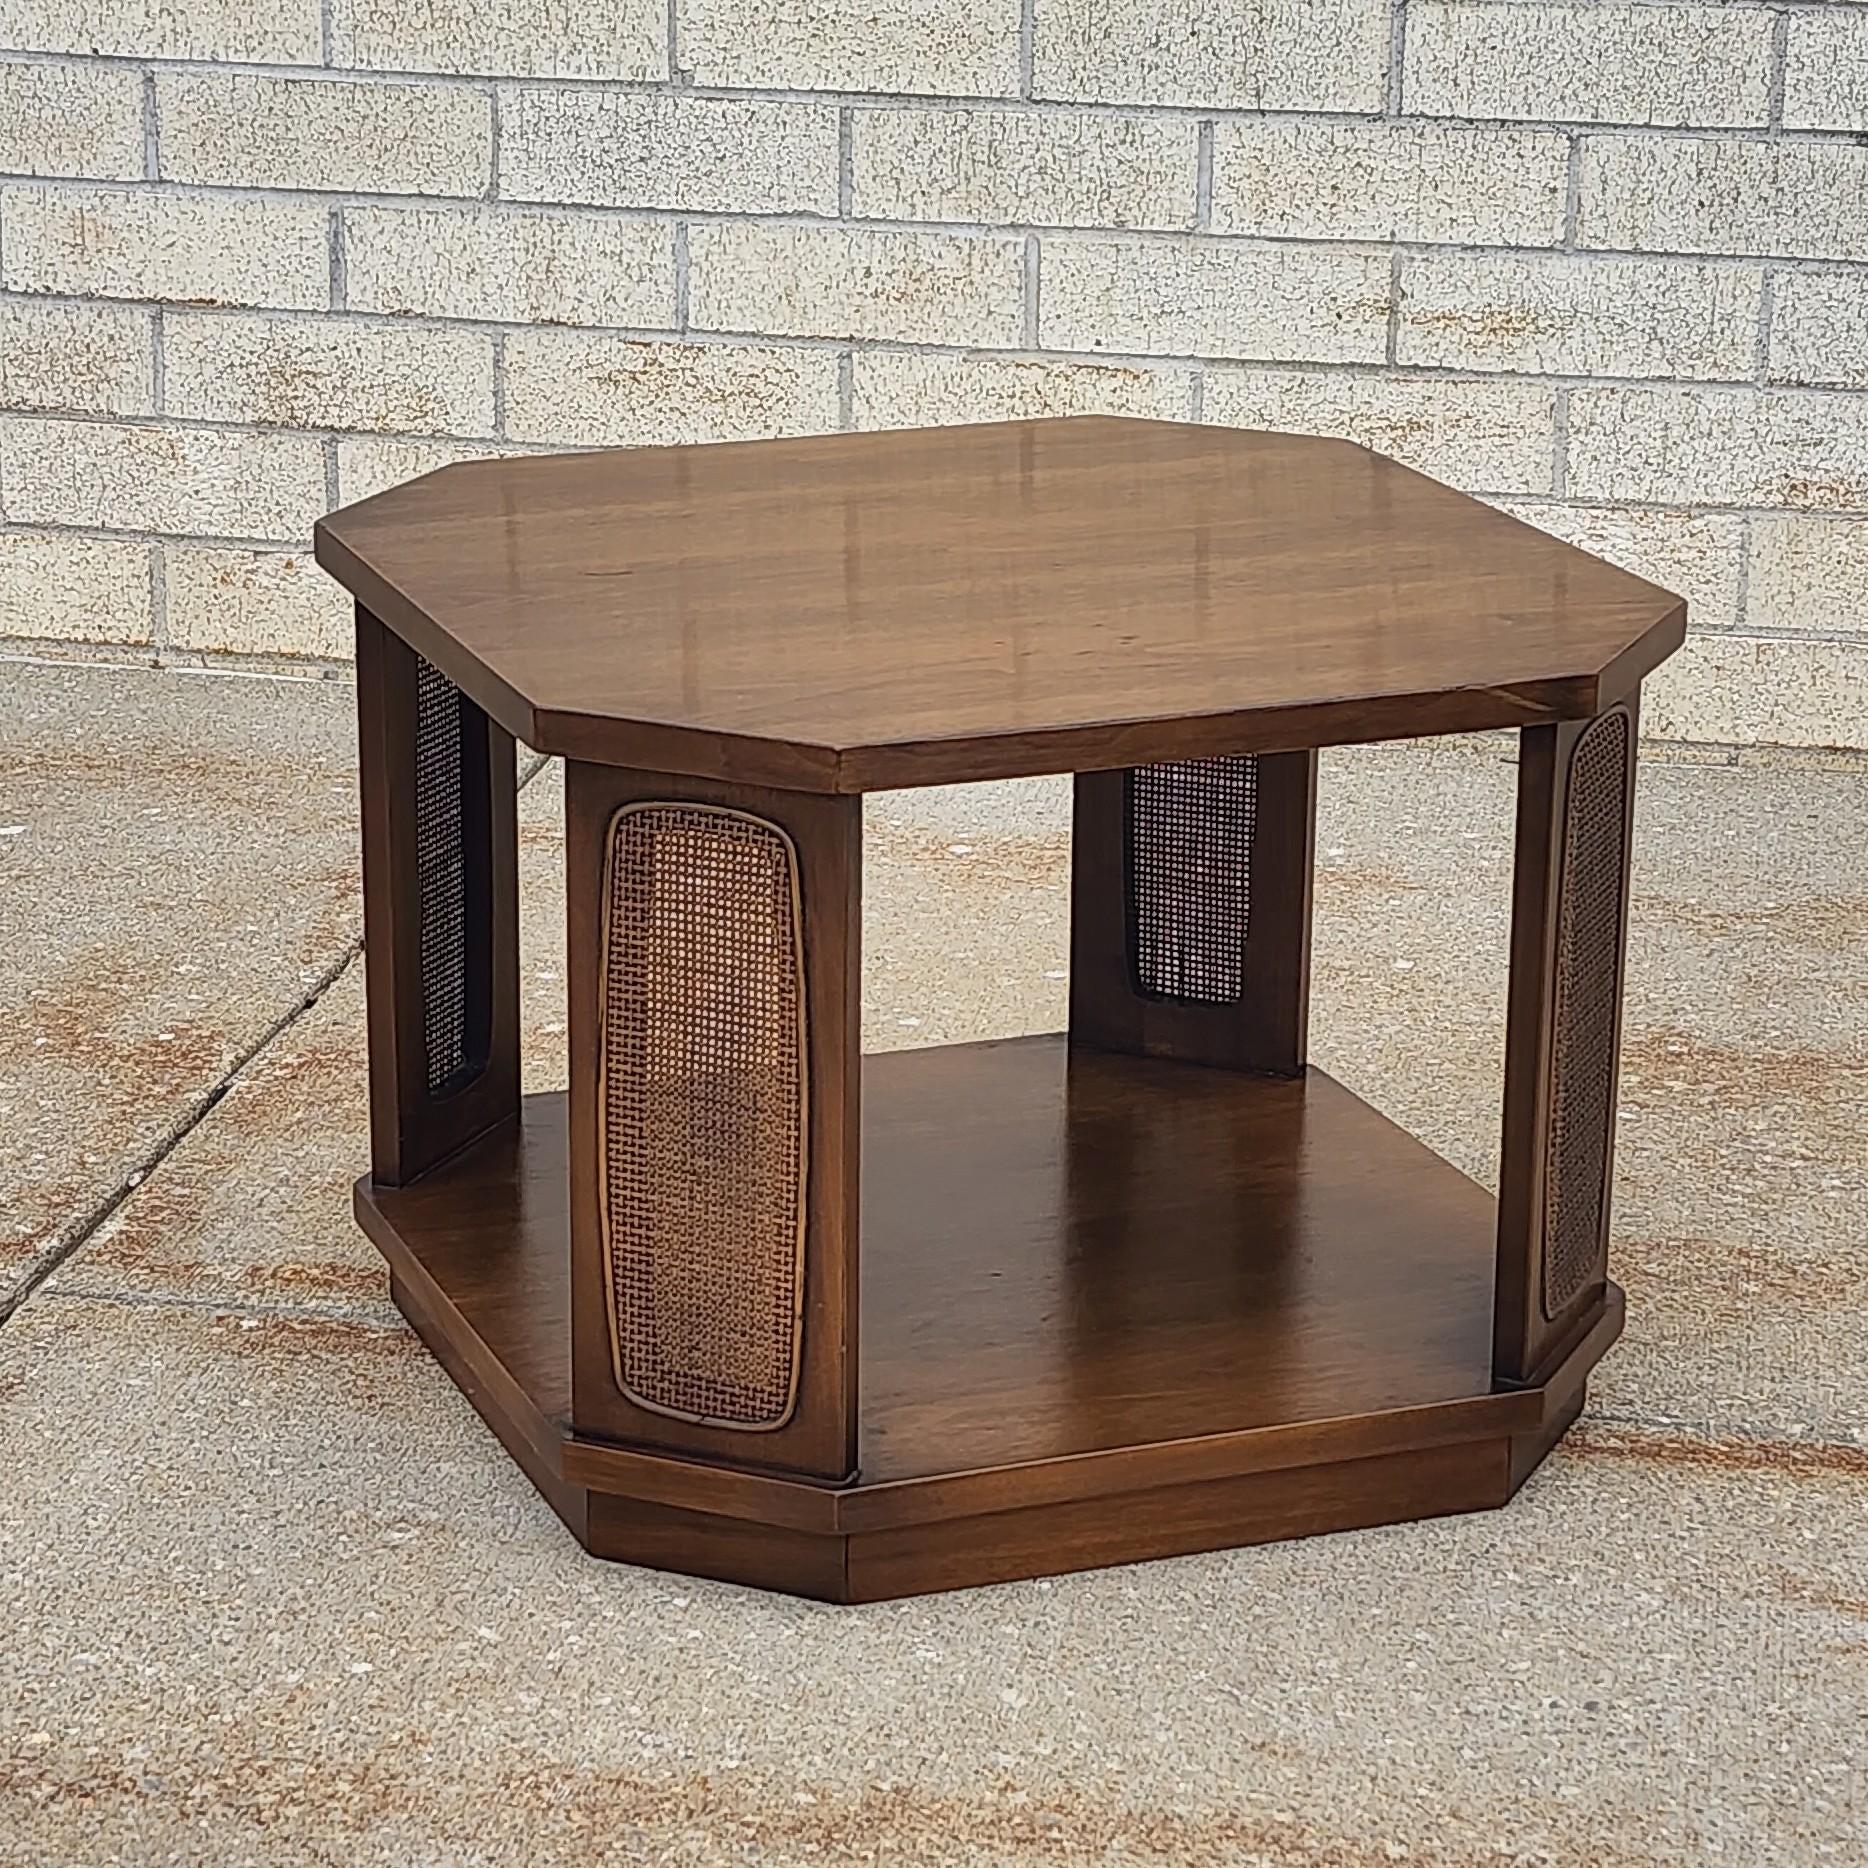 This octagonal side table is nicely made by Broyhill designed for their Premier line. Broyhill makes wonderful lasting designs with excellent quality. Made out of solid hard wood it is sturdy and functionable. It is beautifully done in a rich dark